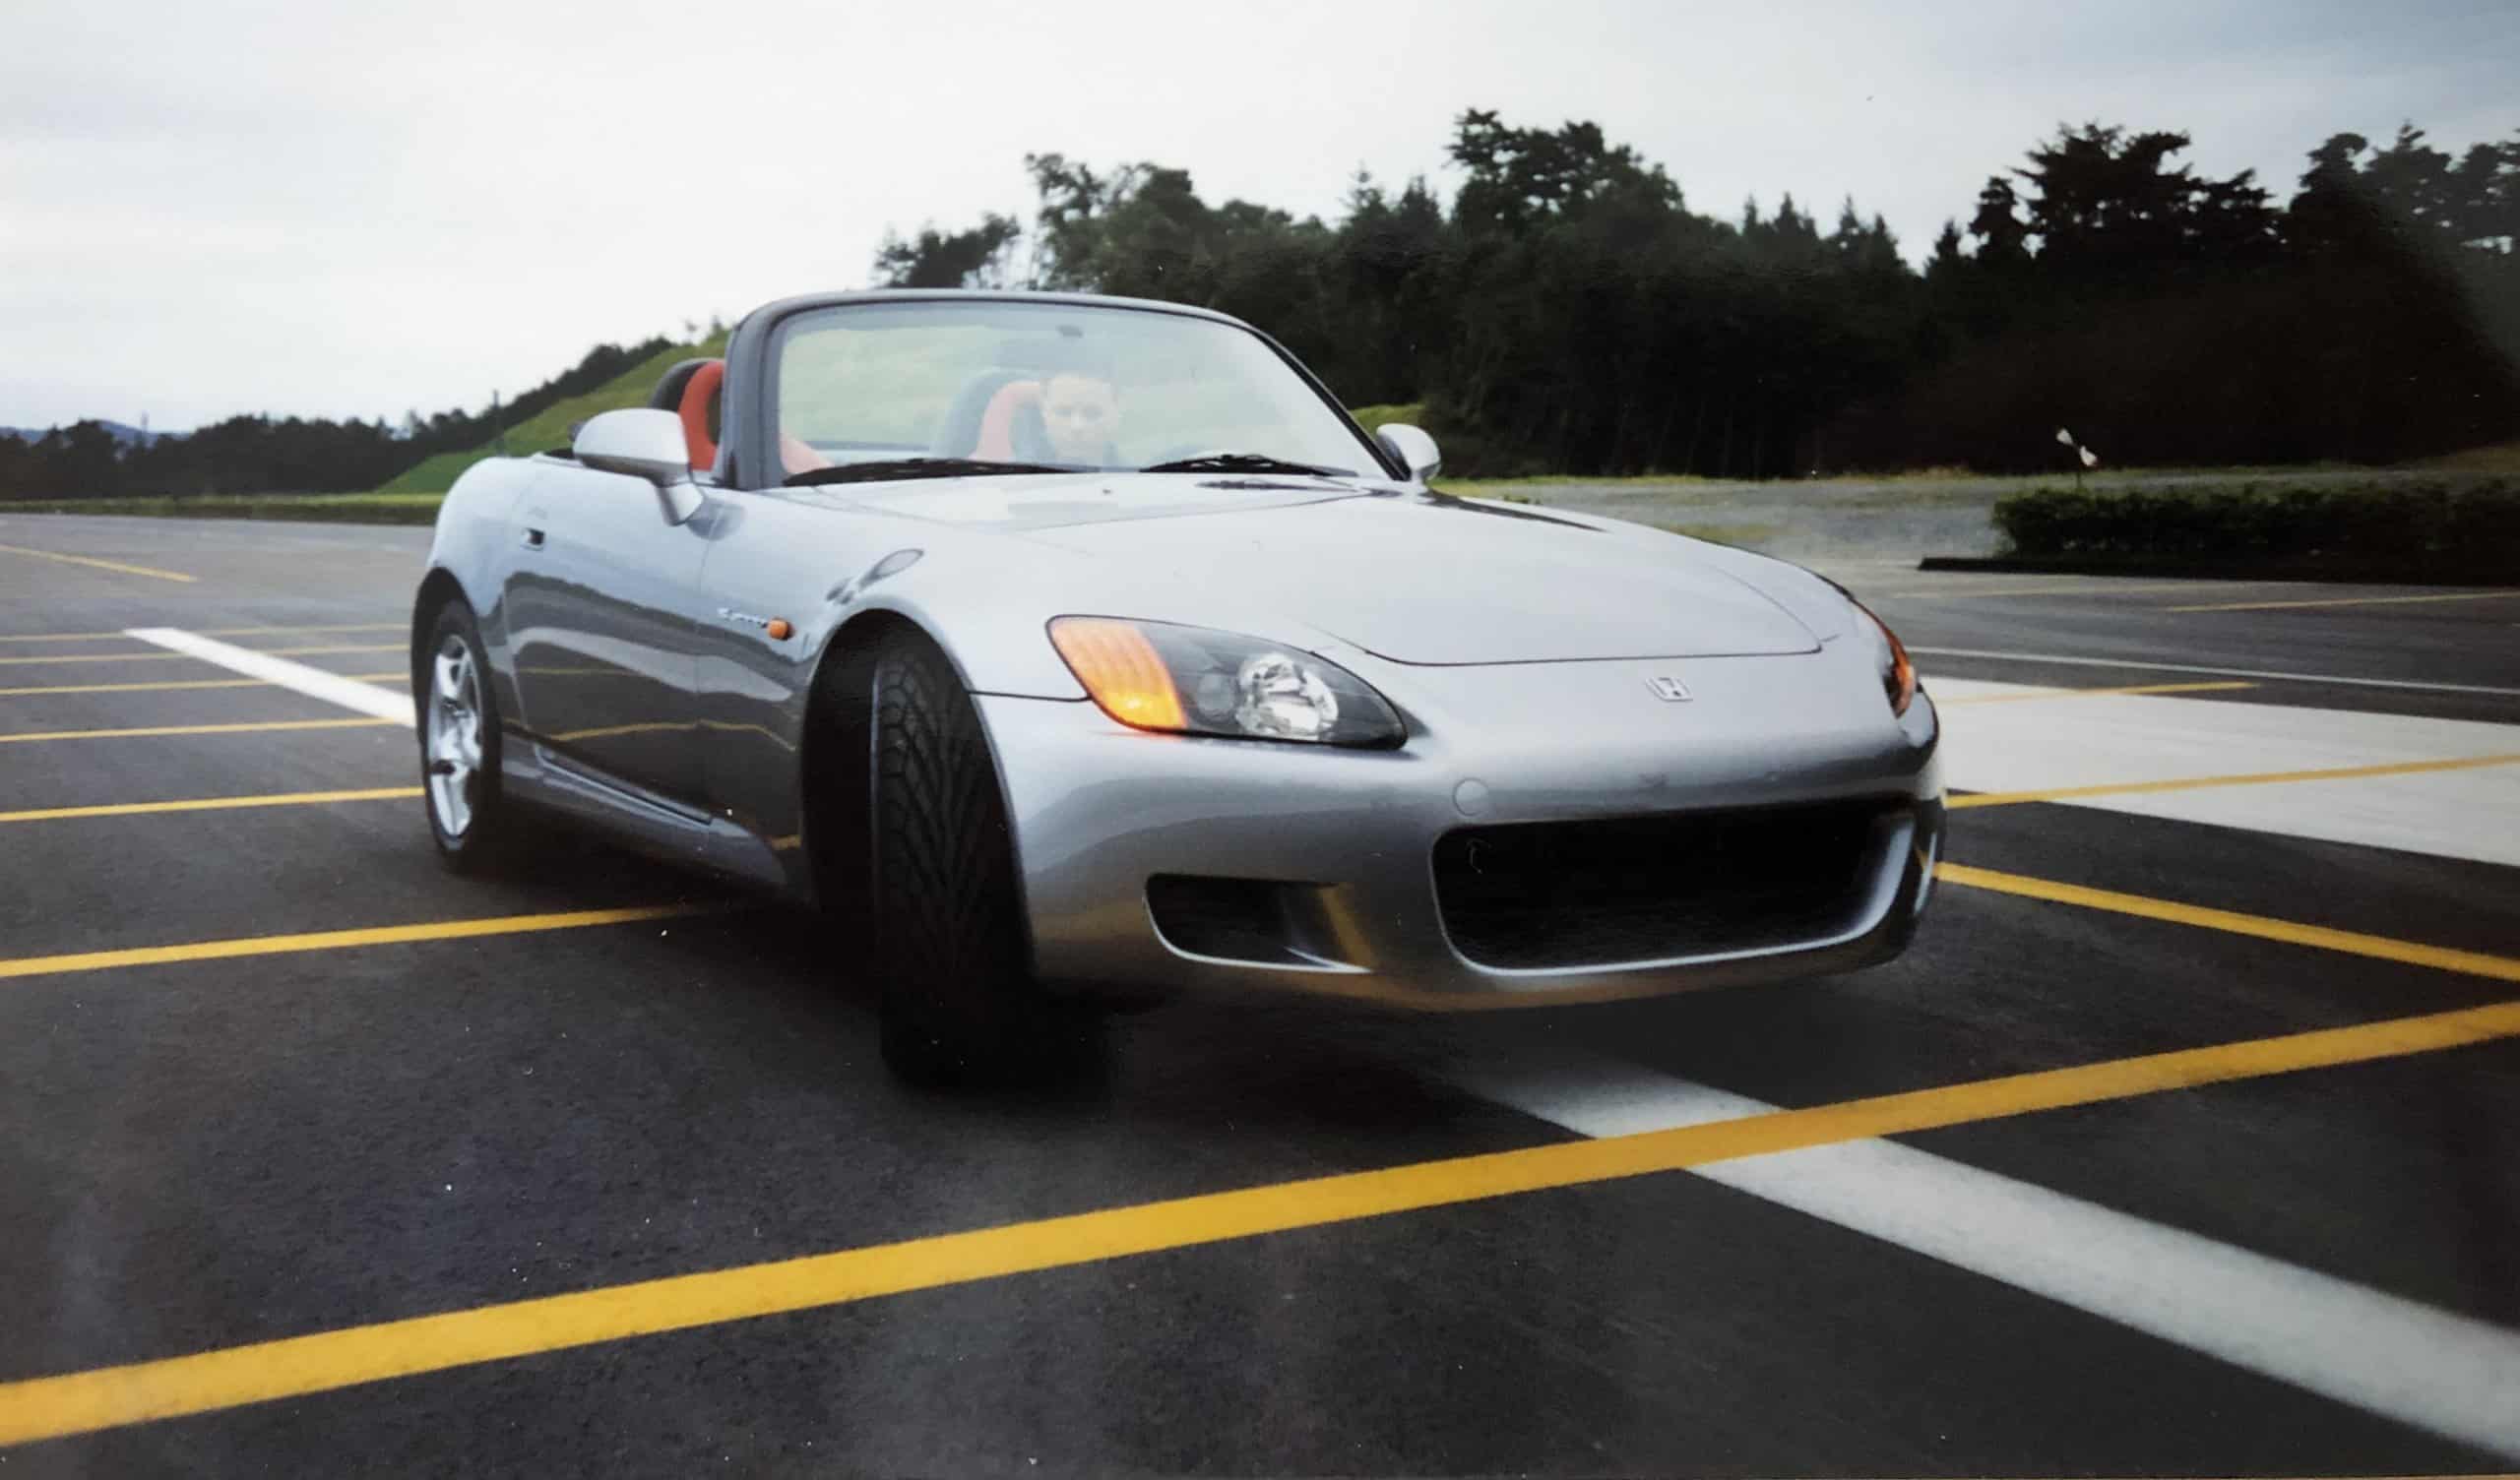 Honda S2000, The very brief but still exclusive first drive, ClassicCars.com Journal